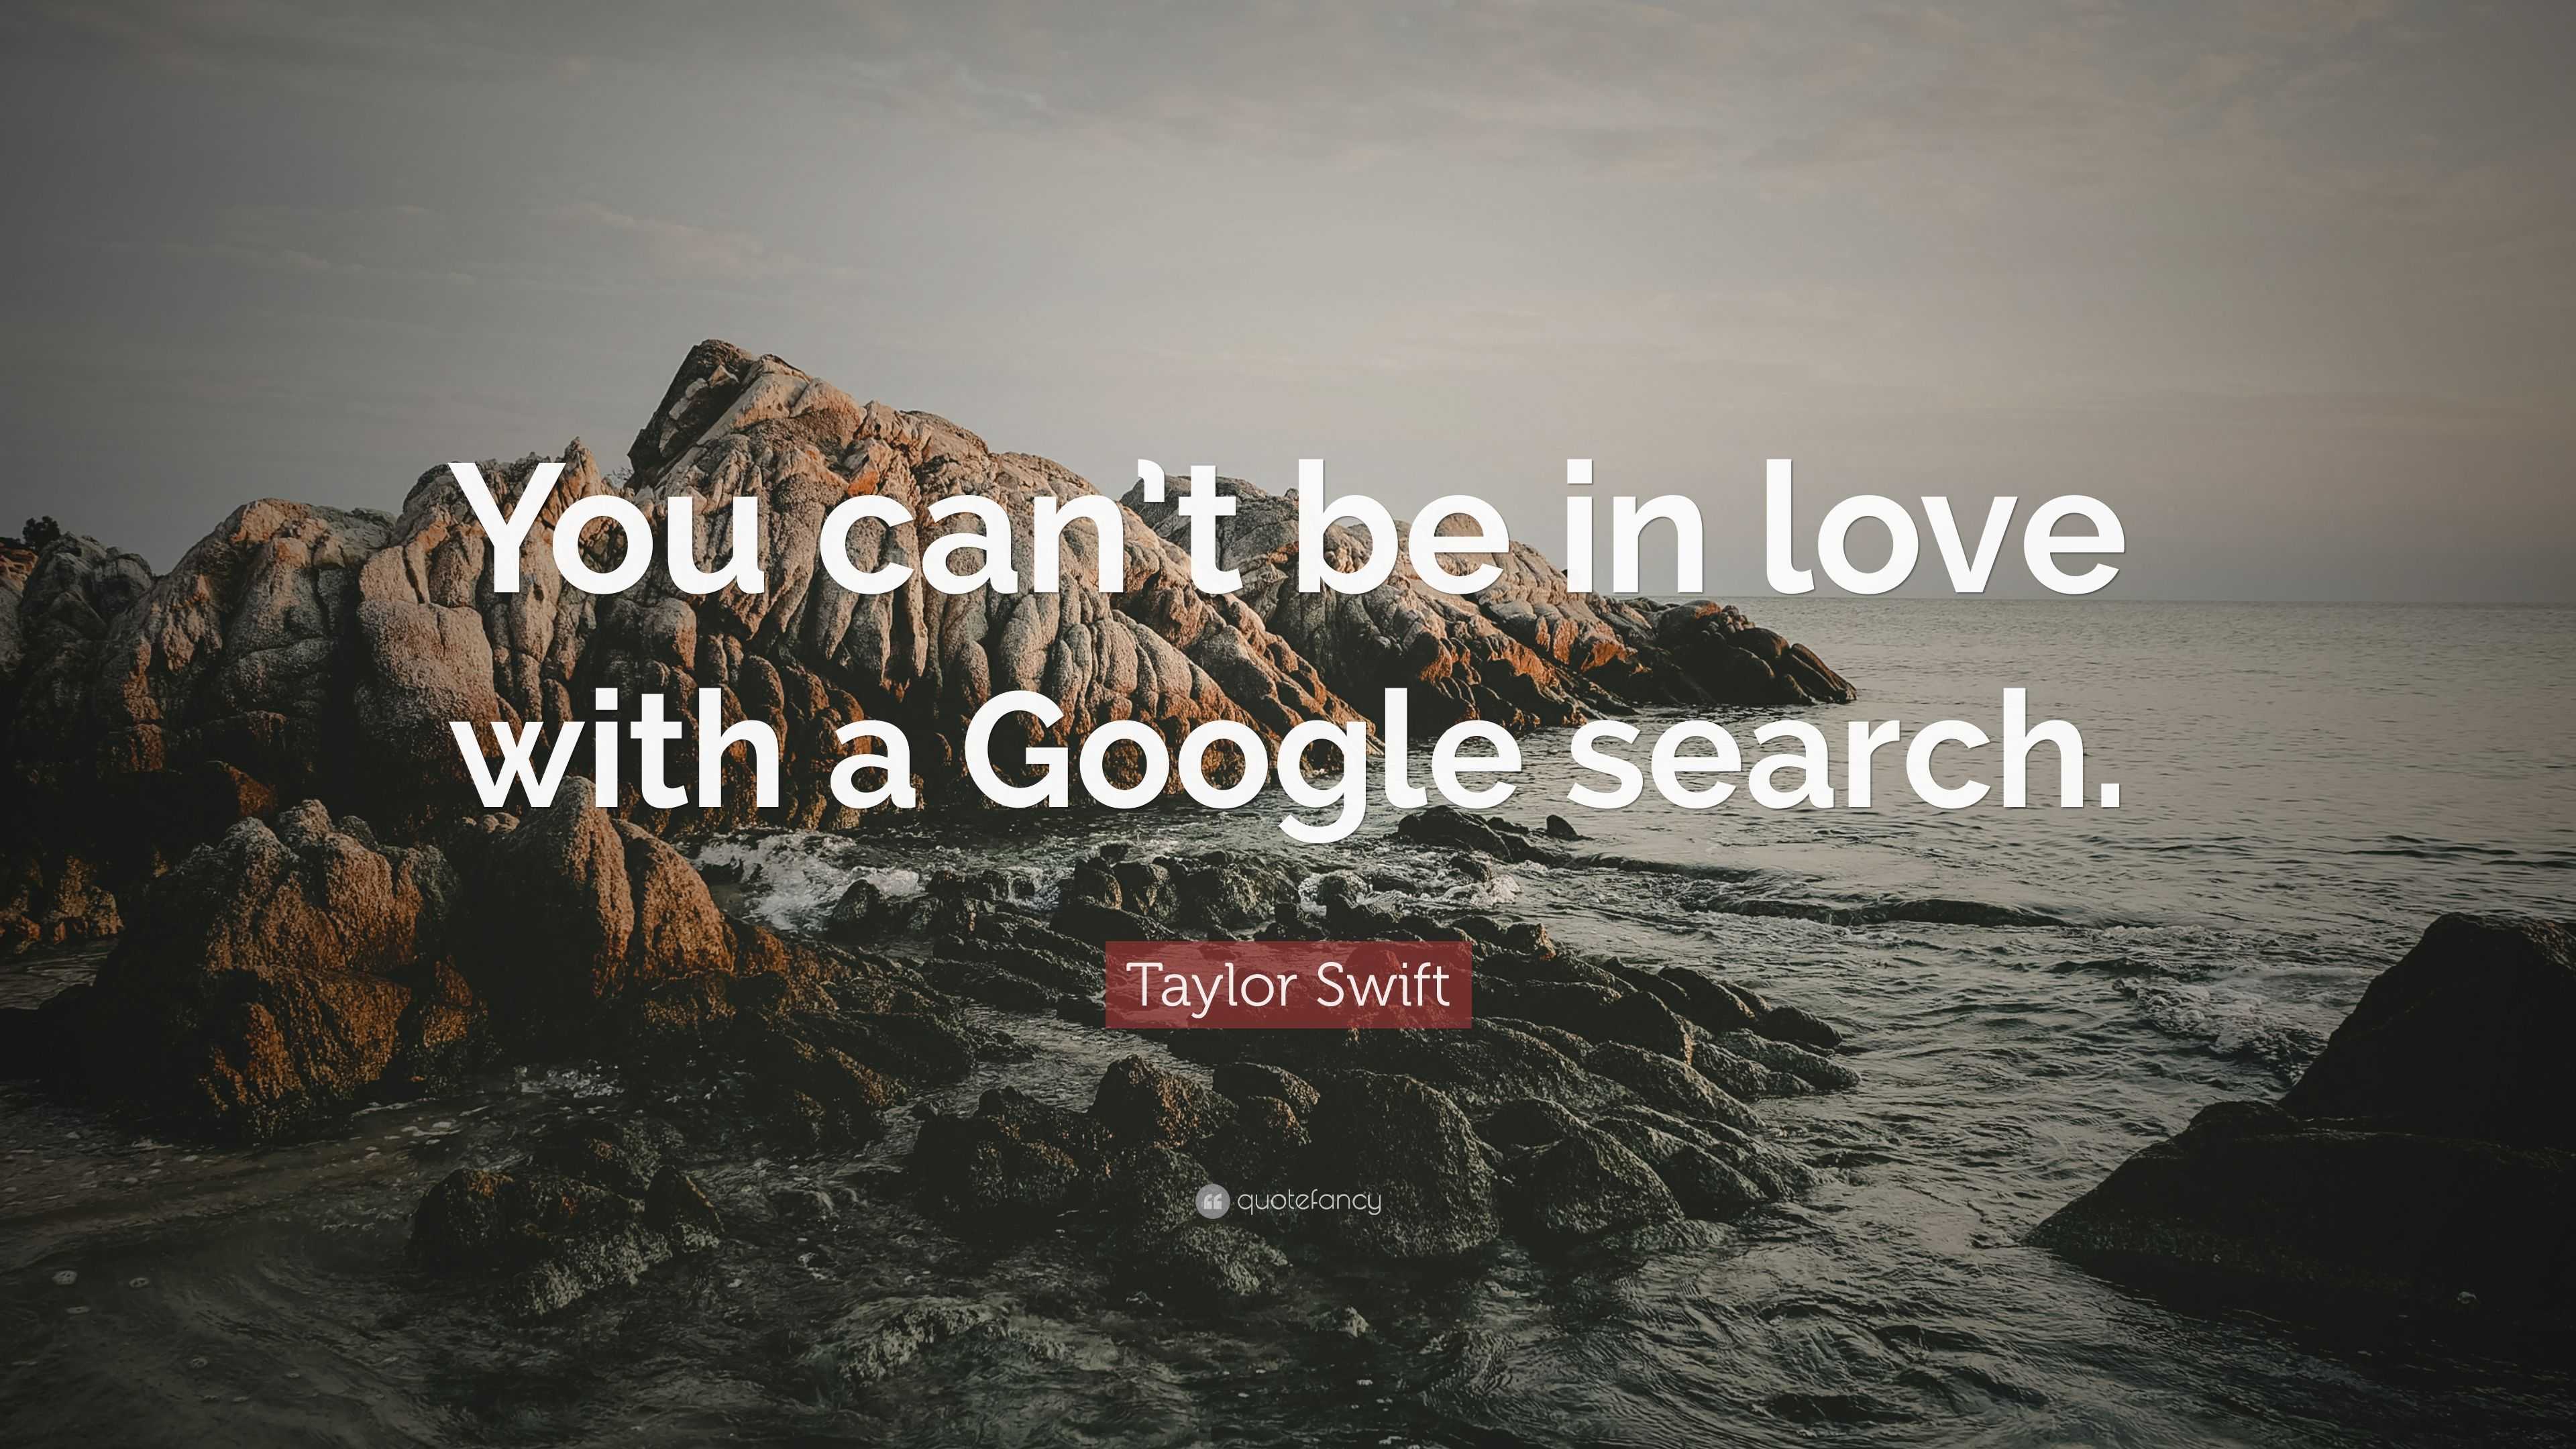 Taylor Swift Quote: “You can't be in love with a Google search.”